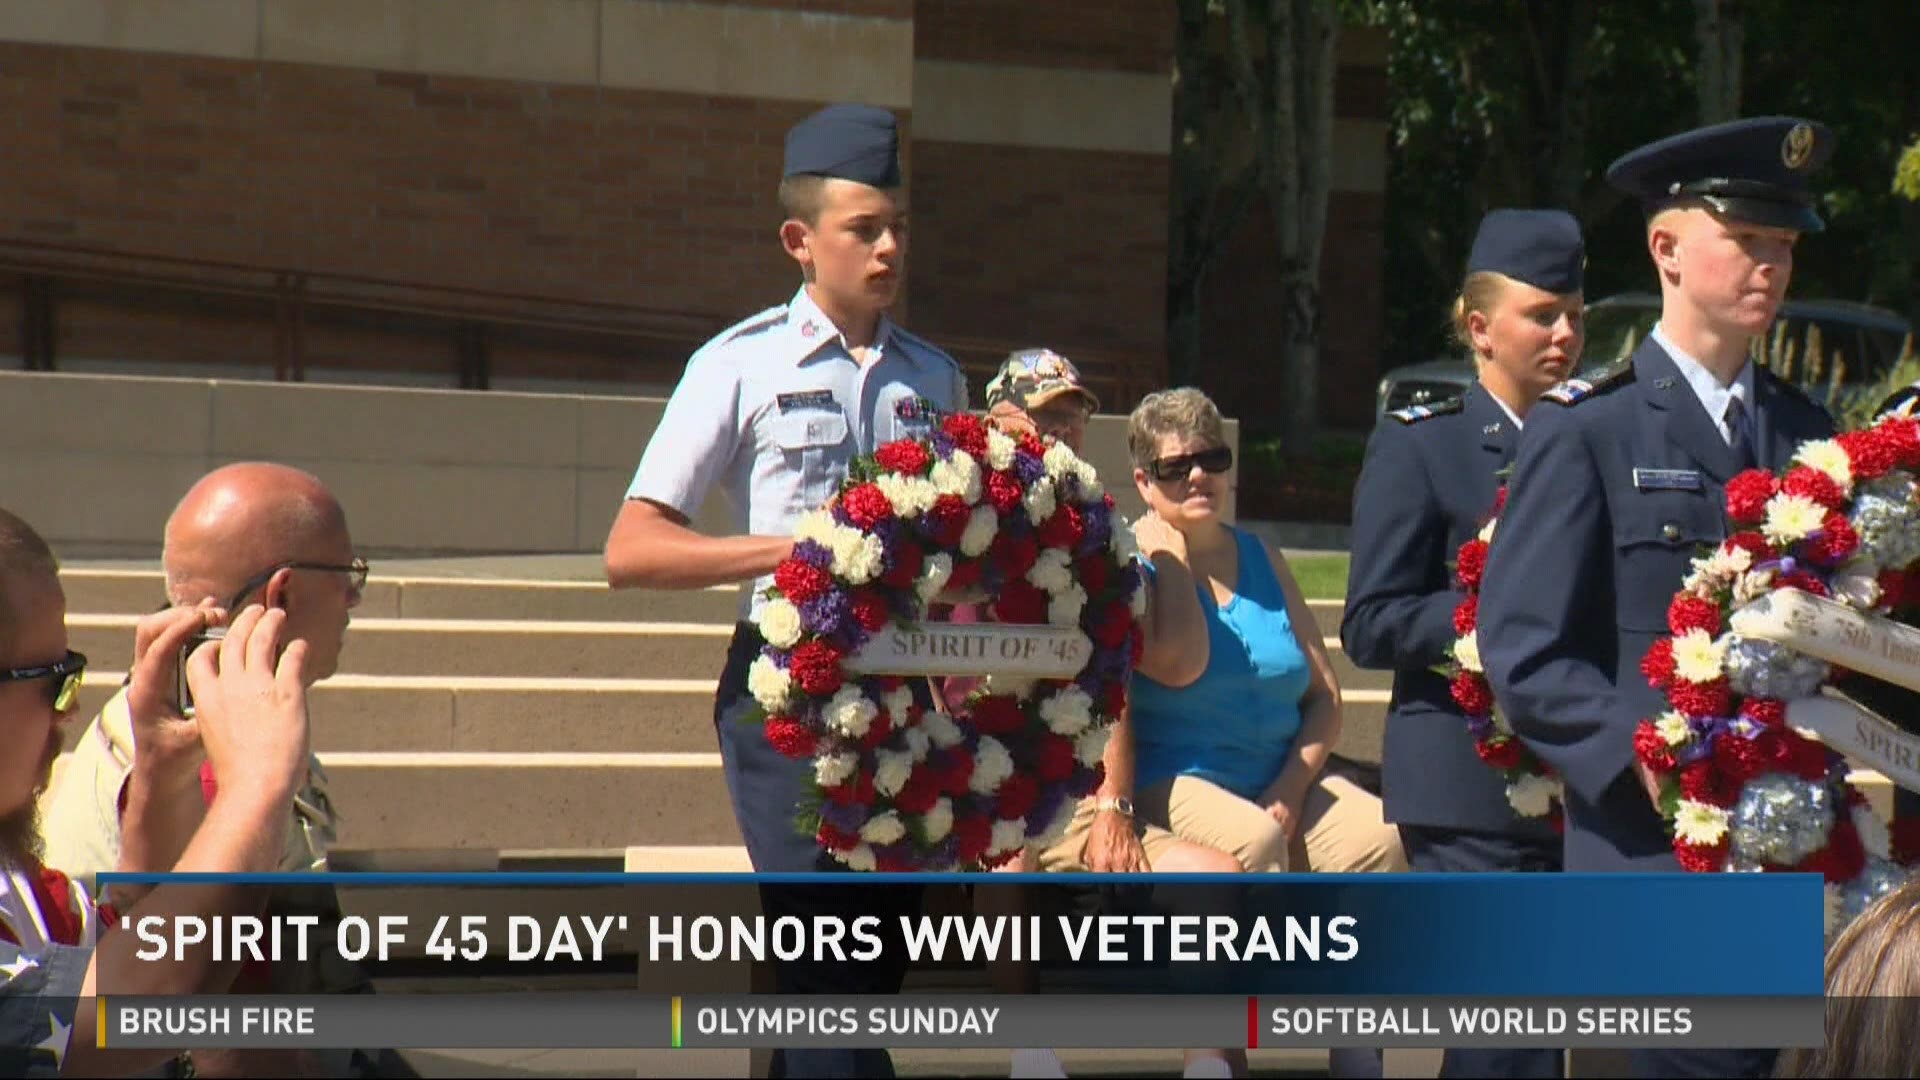 Spirit of '45 Day honors WWII veterans